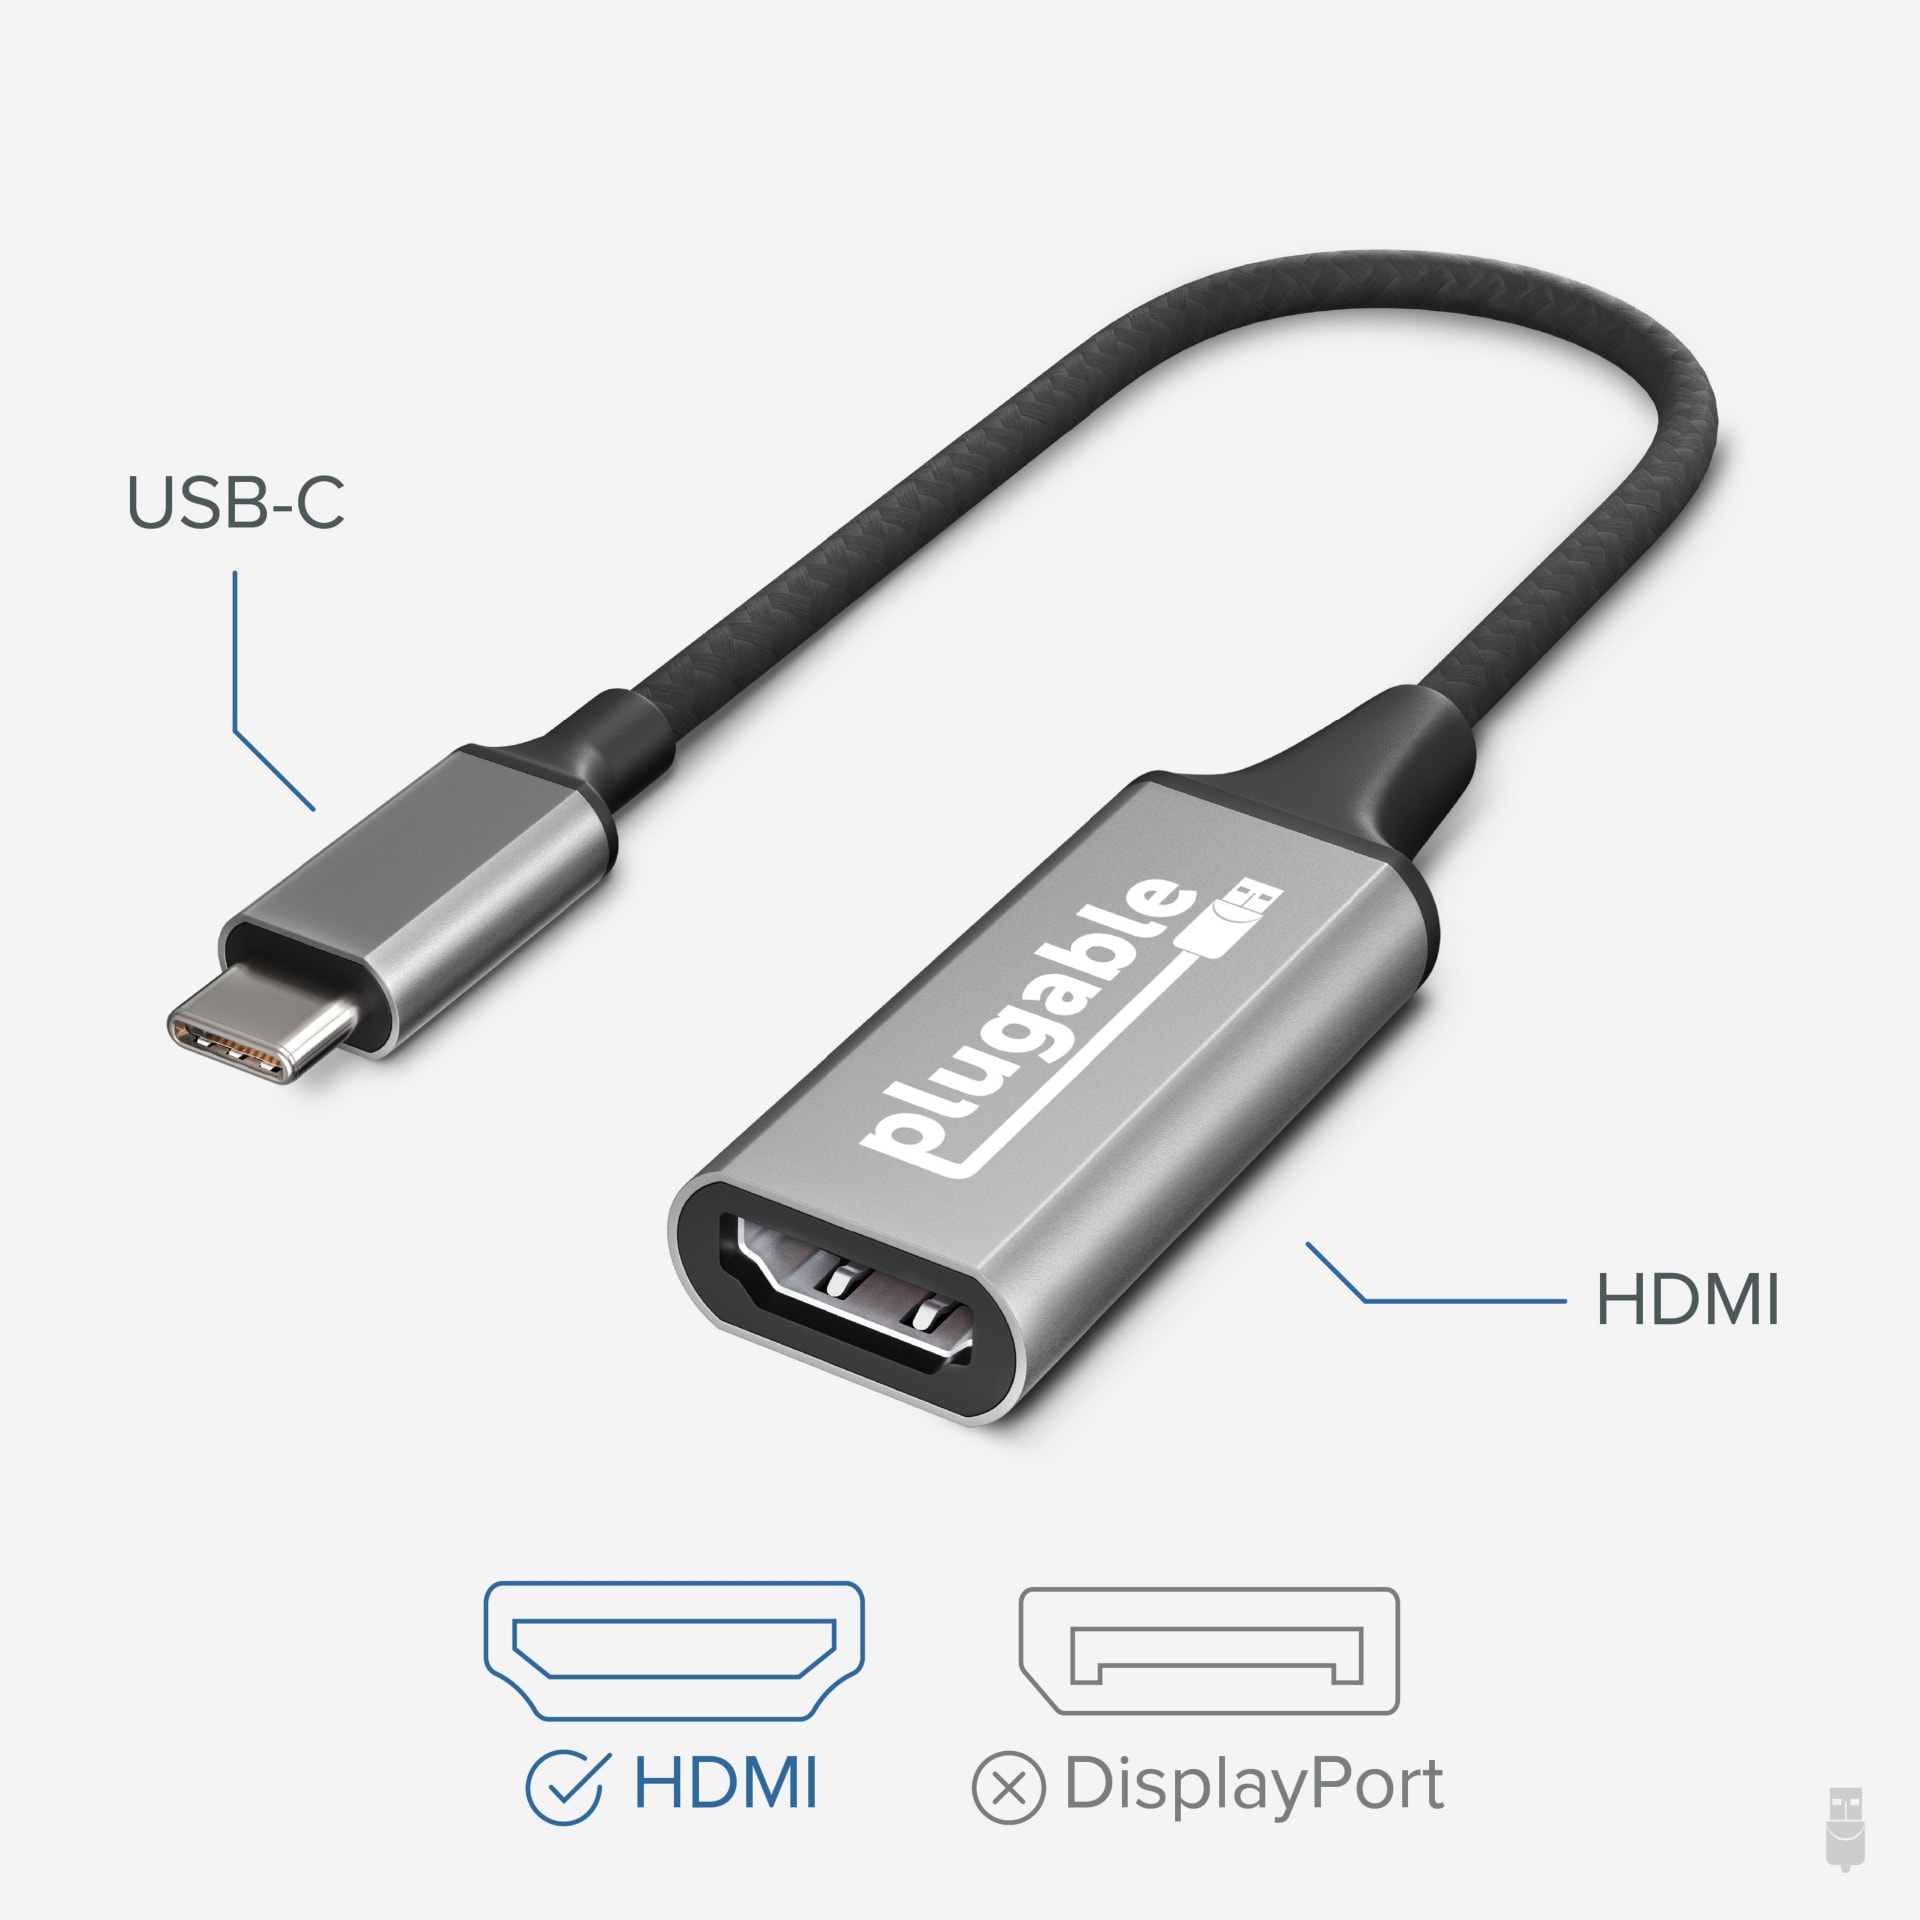 Plugable Alt Mode Monitor Adapter -USB-C to HDMI Windows,Mac,Driverless - USBC-HDMI Monitor Cables & Adapters - CDW.com